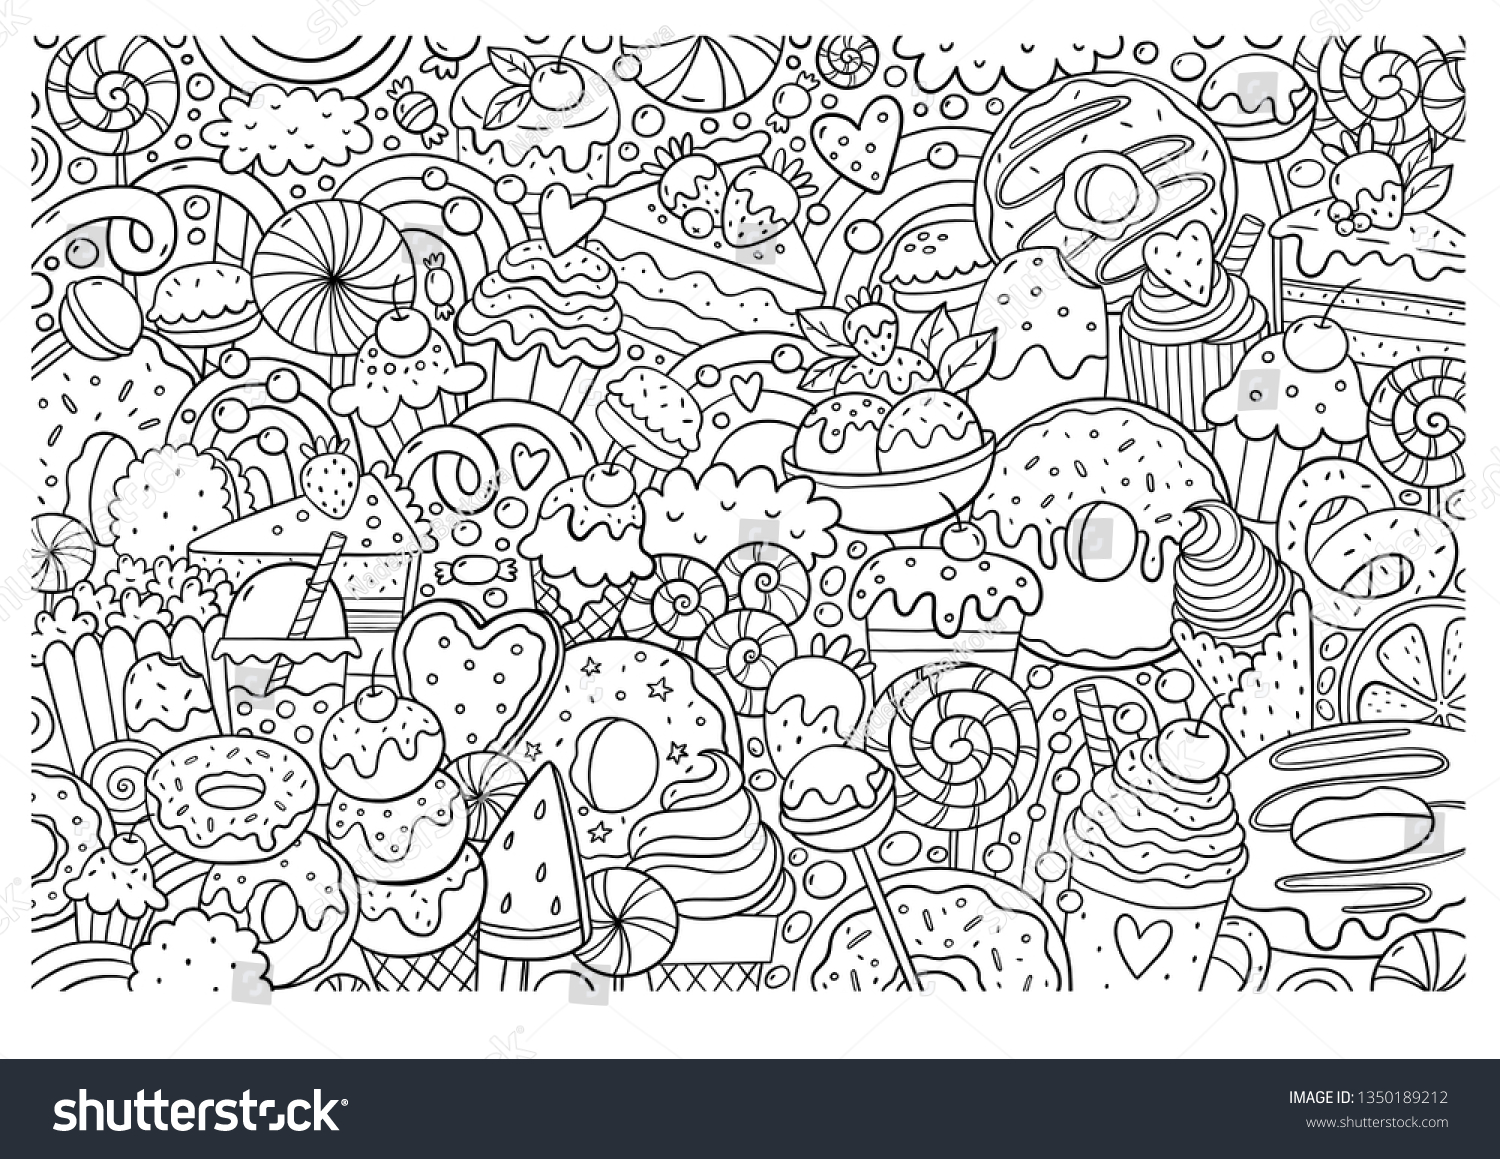 Big Coloring Poster Sweet Candy Shop Stock Illustration 1350189212